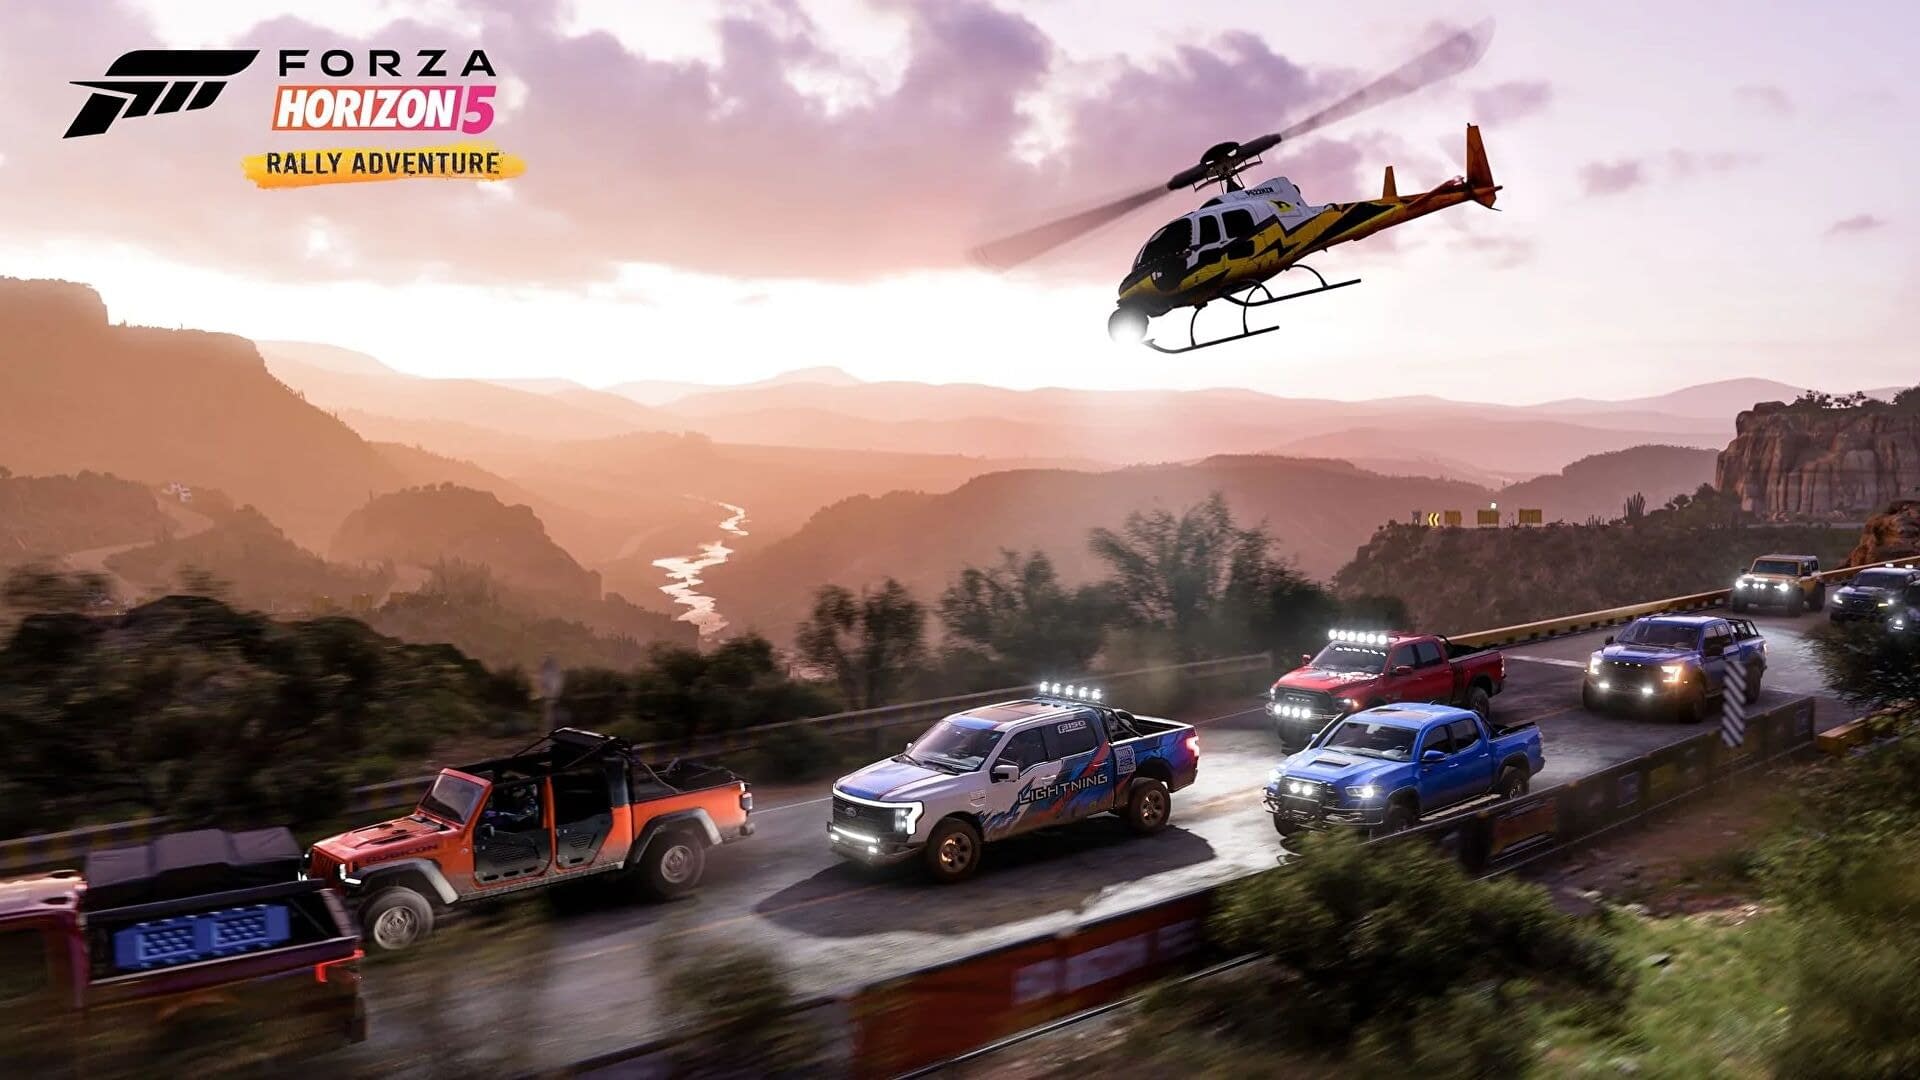 Forza Horizon 5 expansion pack Rally Adventure announced